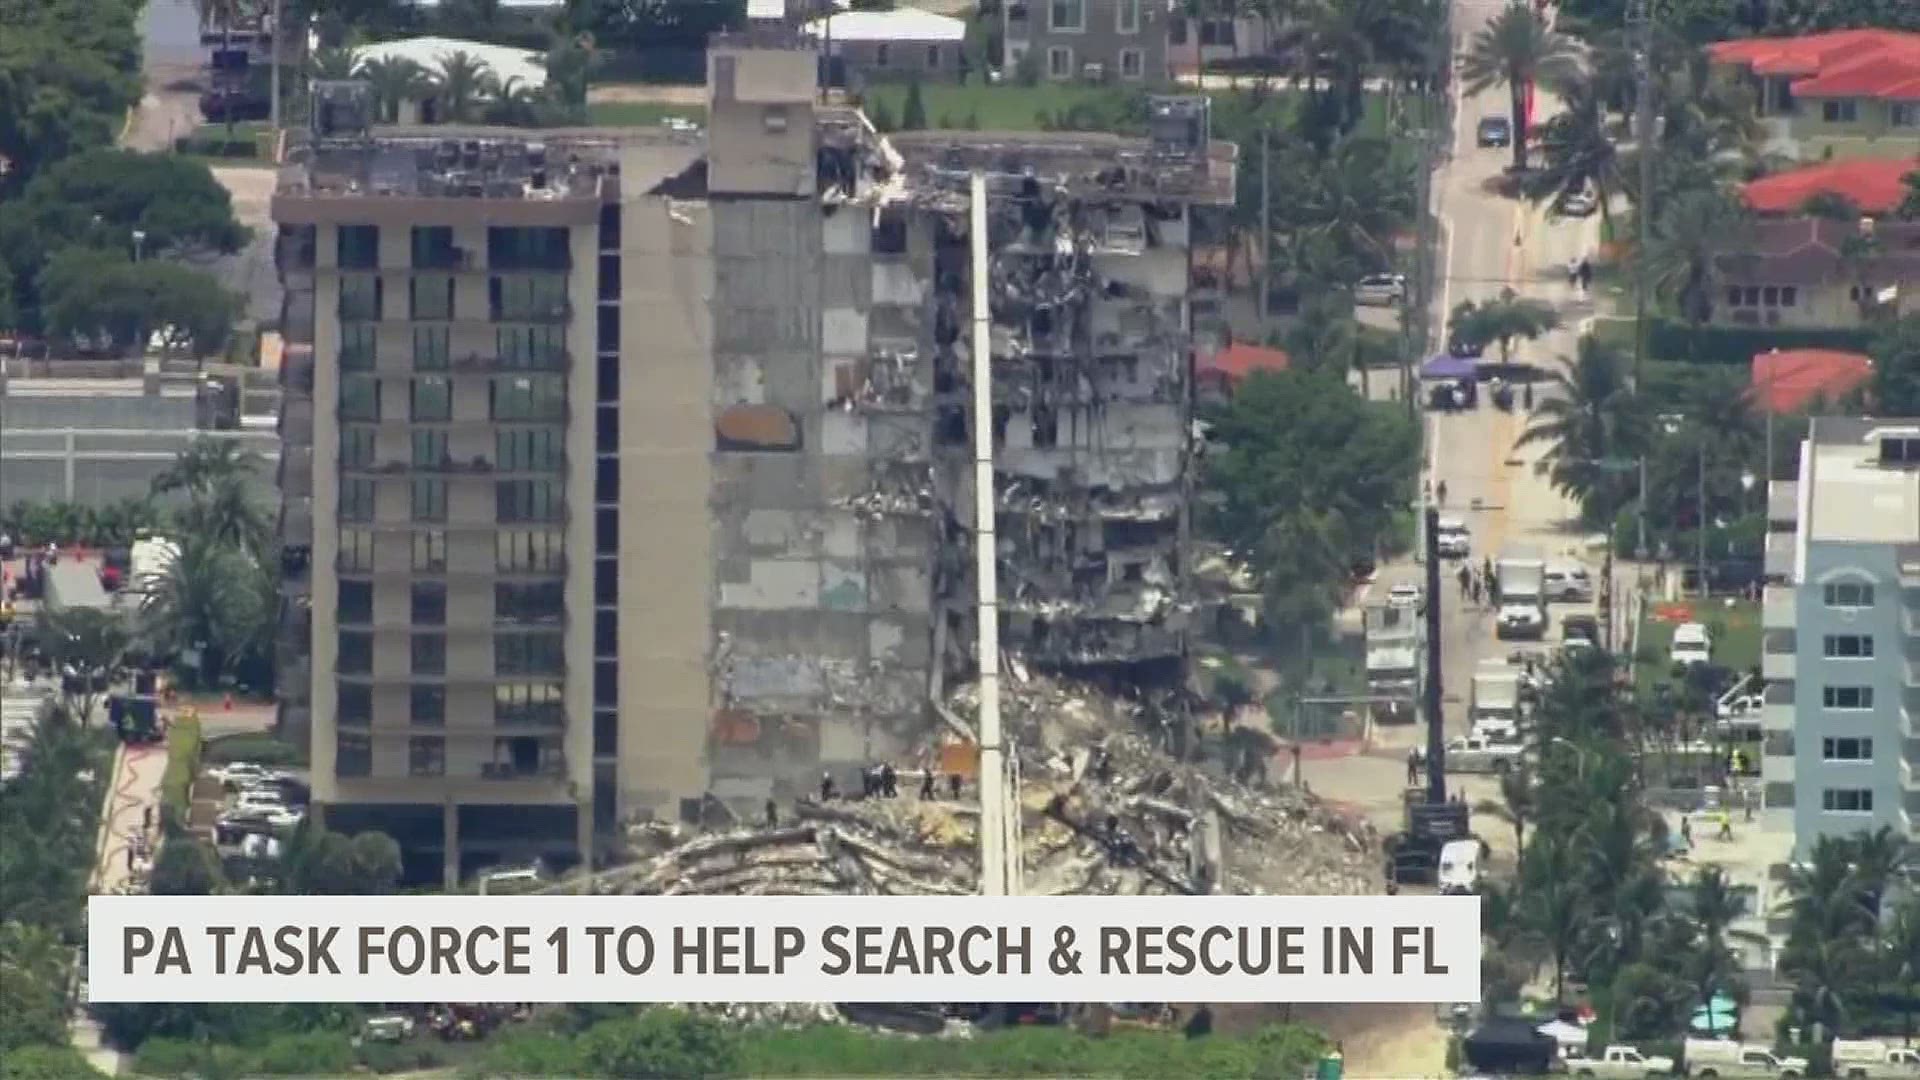 The task force is helping with search and rescue efforts as 145 people still remain missing.